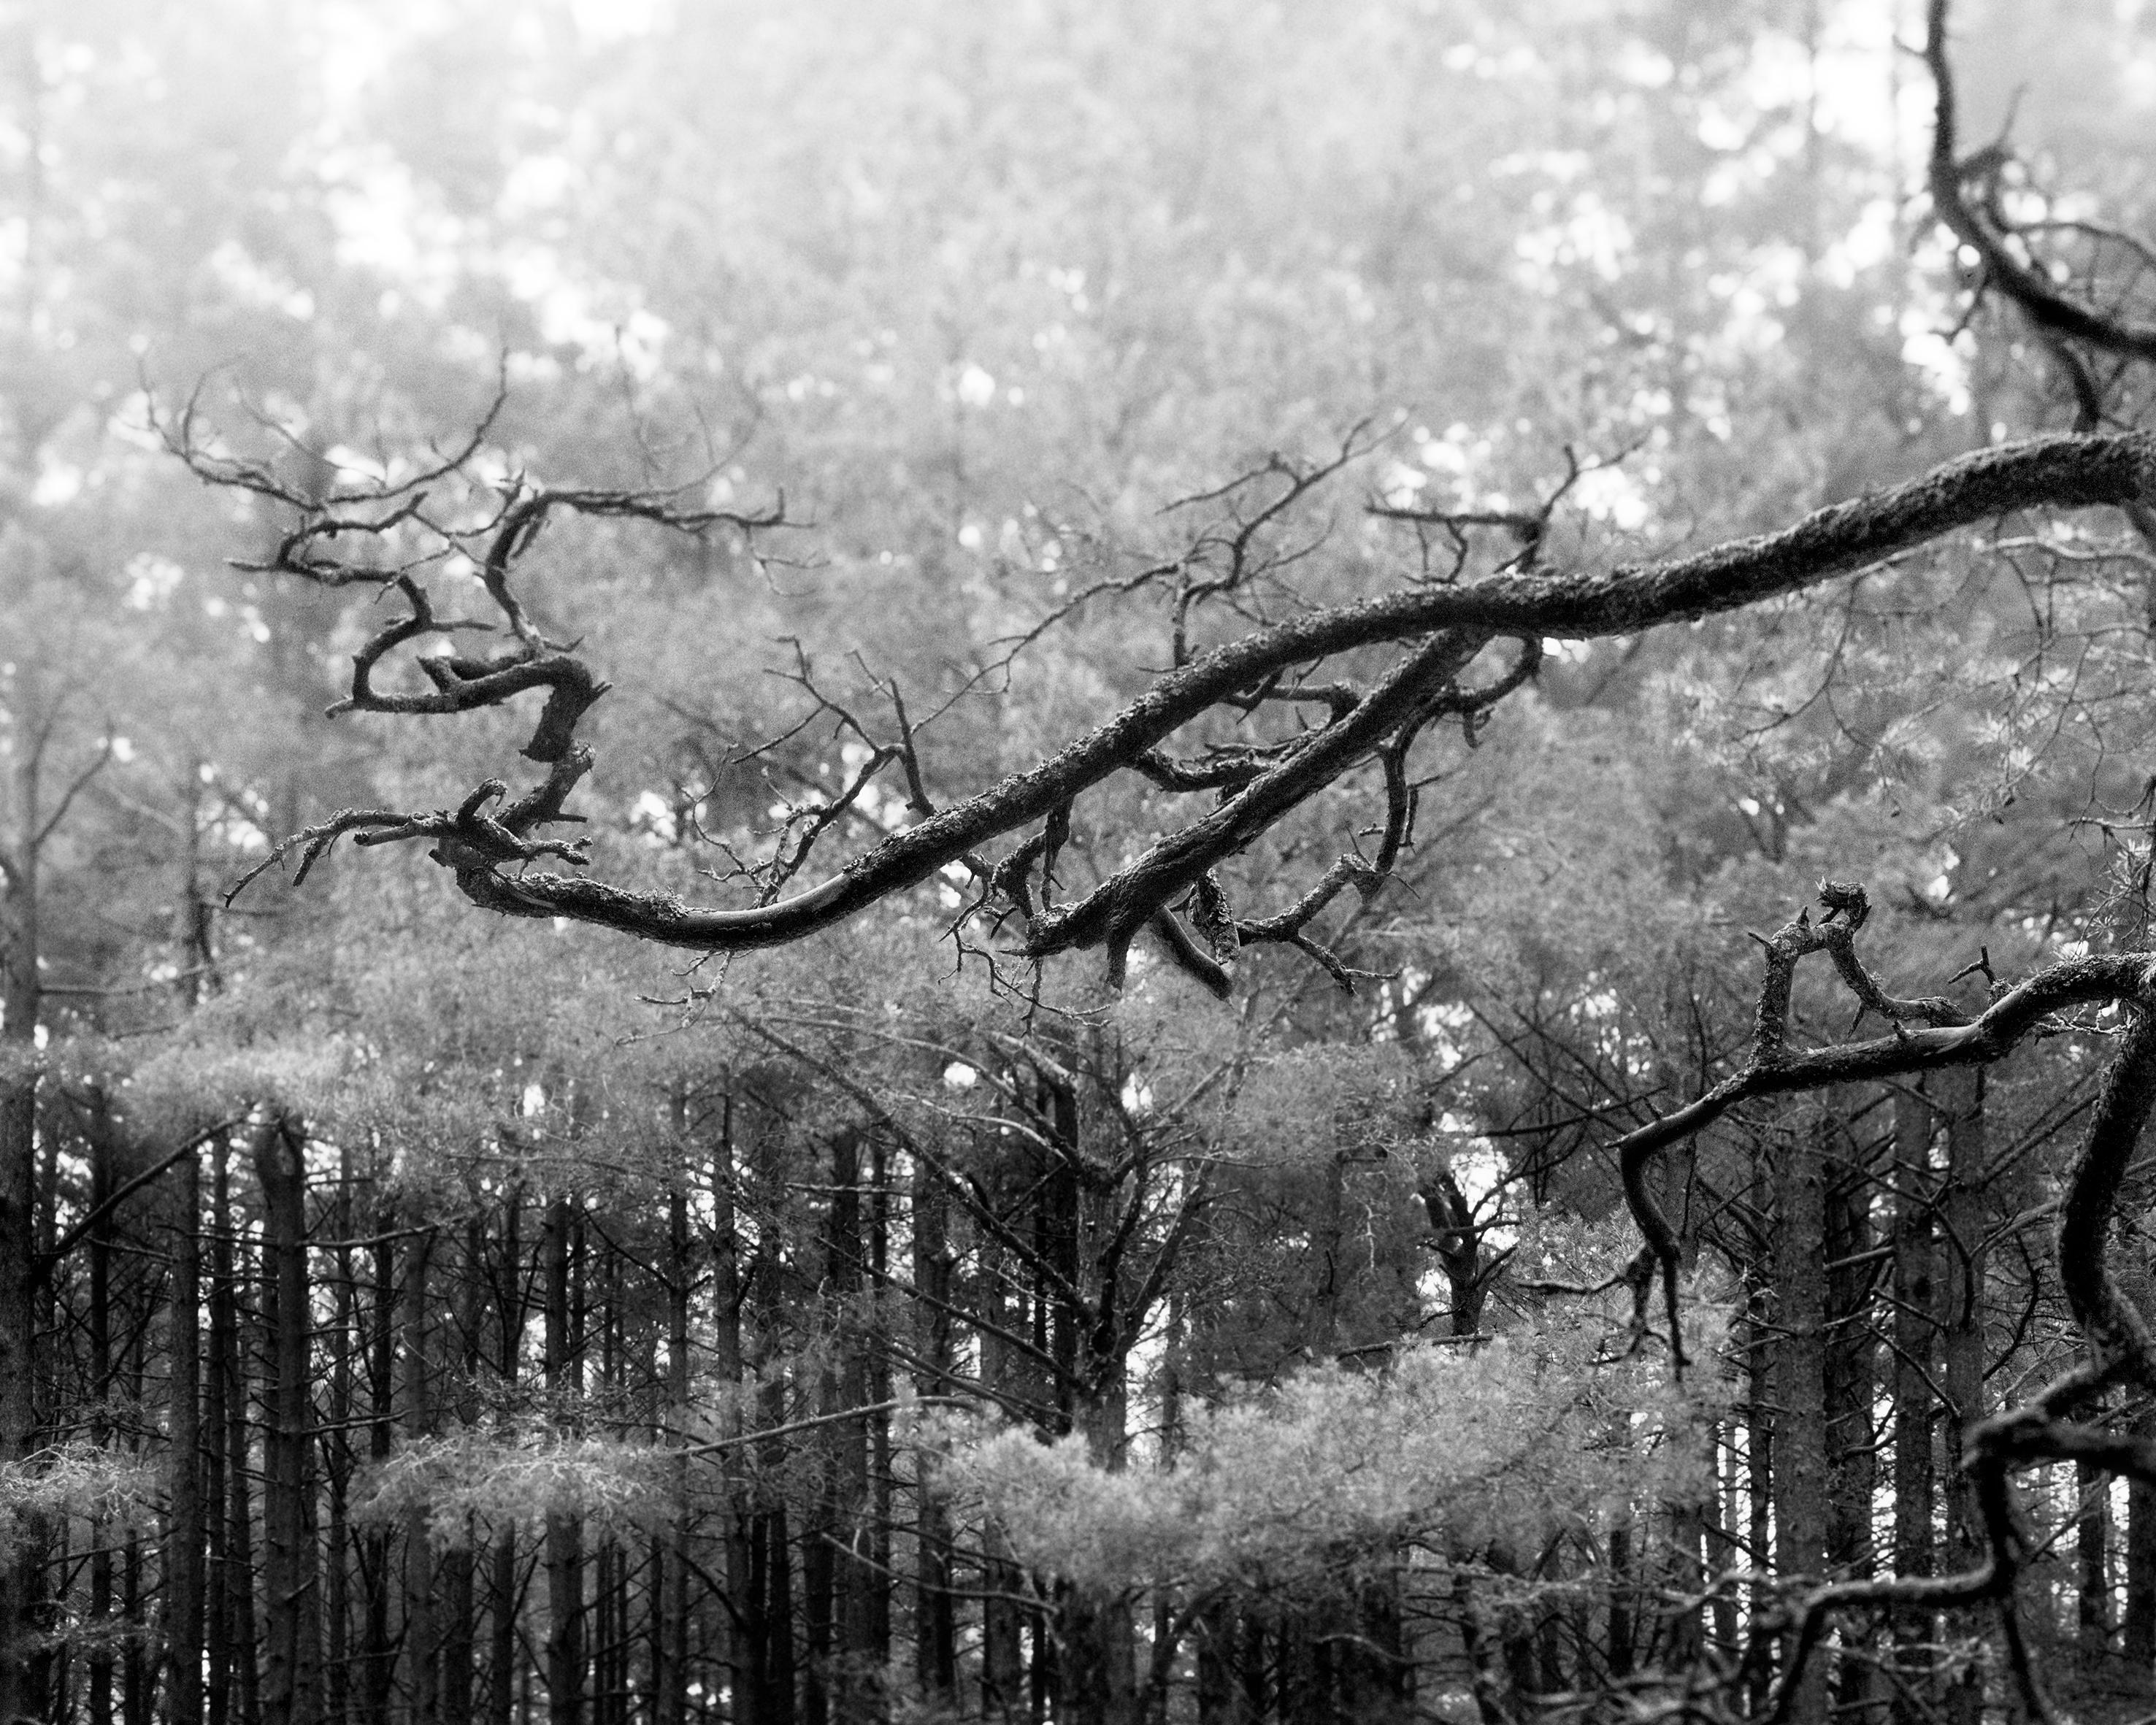 Ugne Pouwell Black and White Photograph - Baltic pine - analogue black and white forest photography, Limited edition of 15